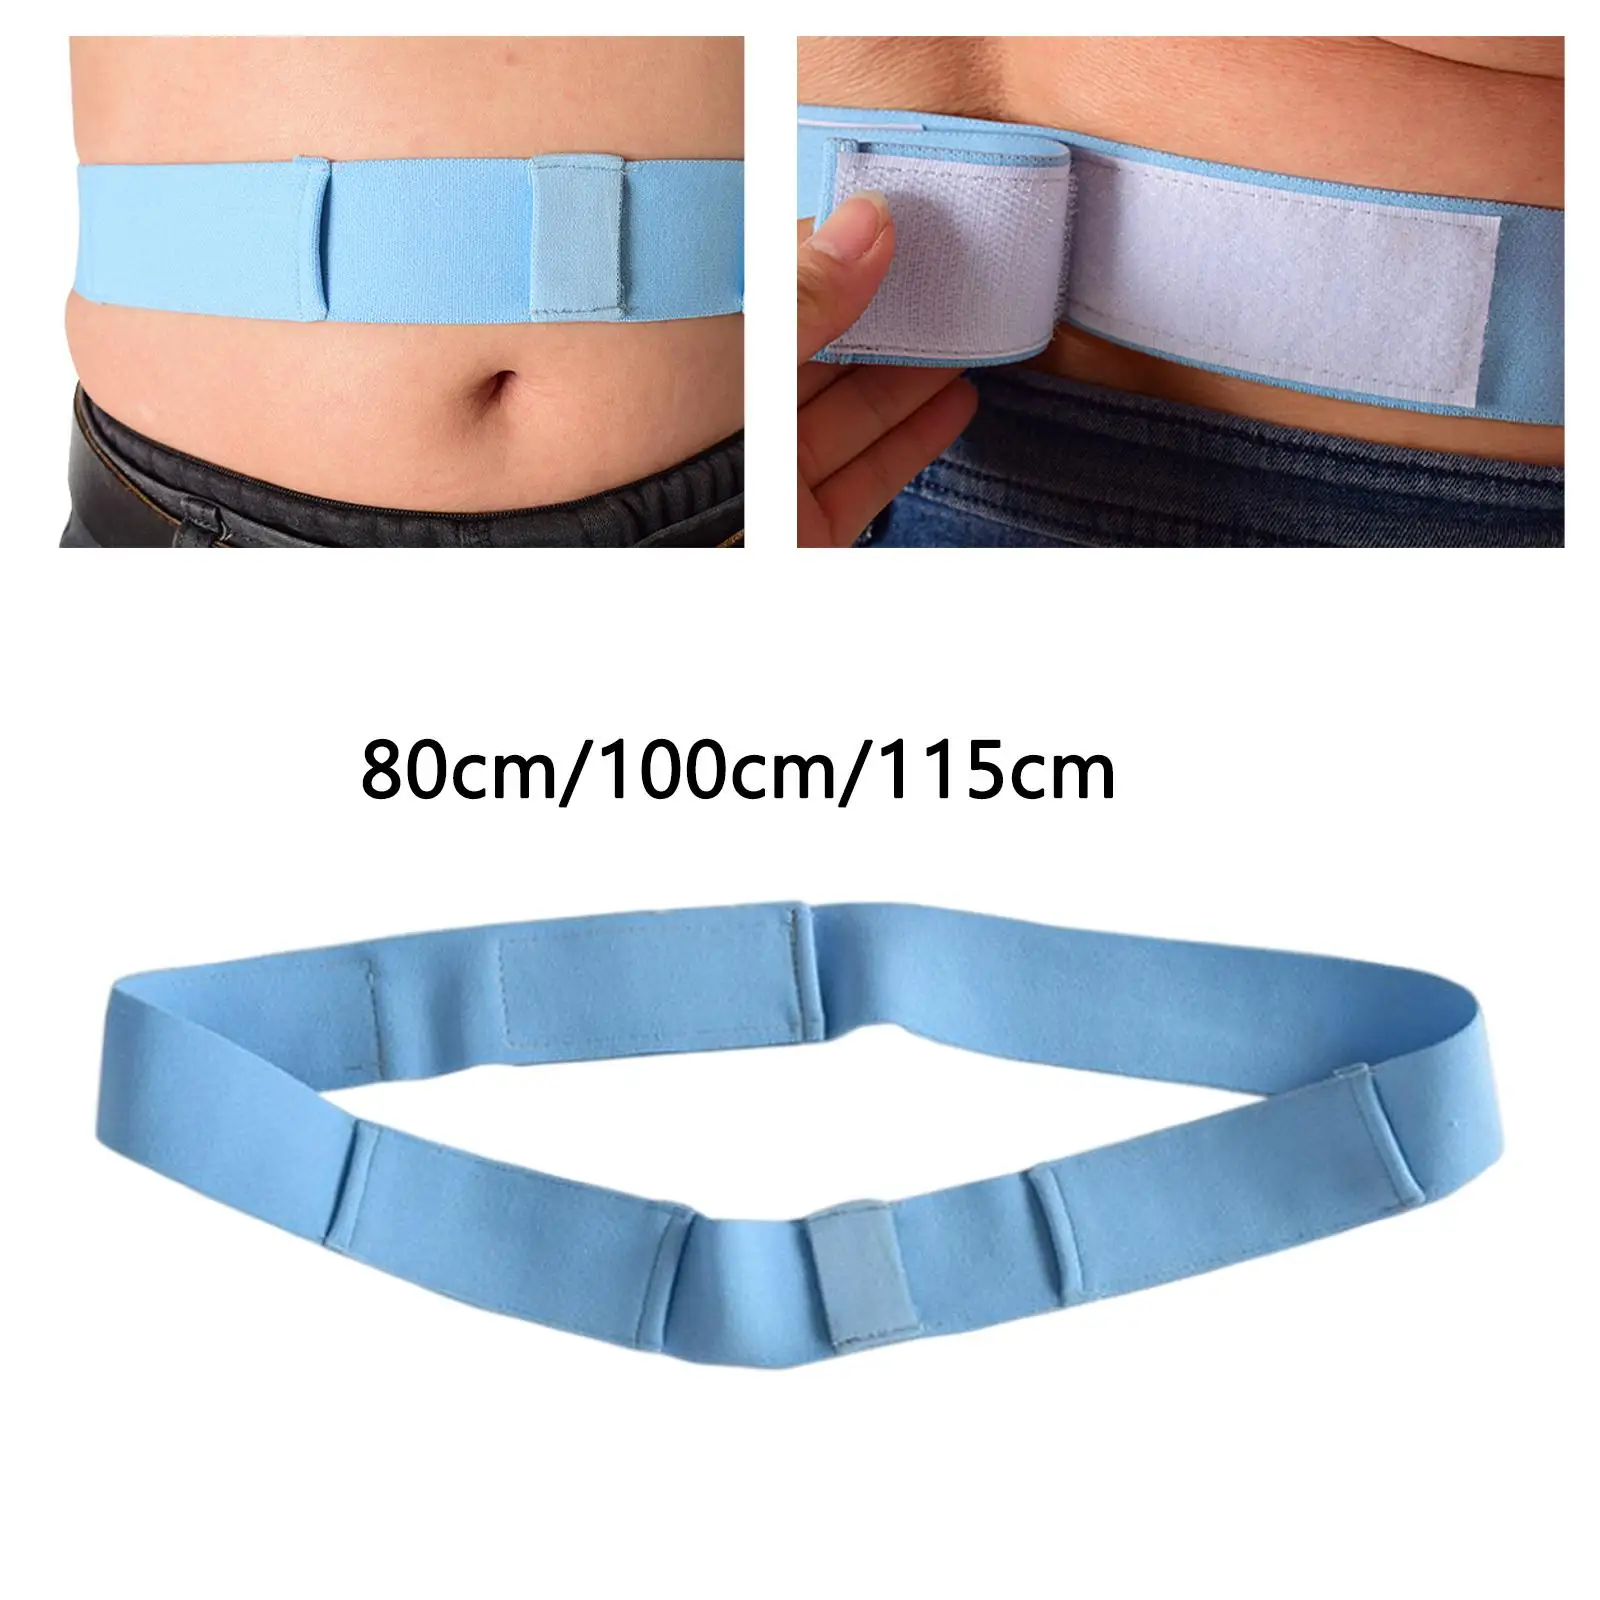 Abdominal Dialysis Belt Porous Mesh Holder for Peritoneal Care Protection